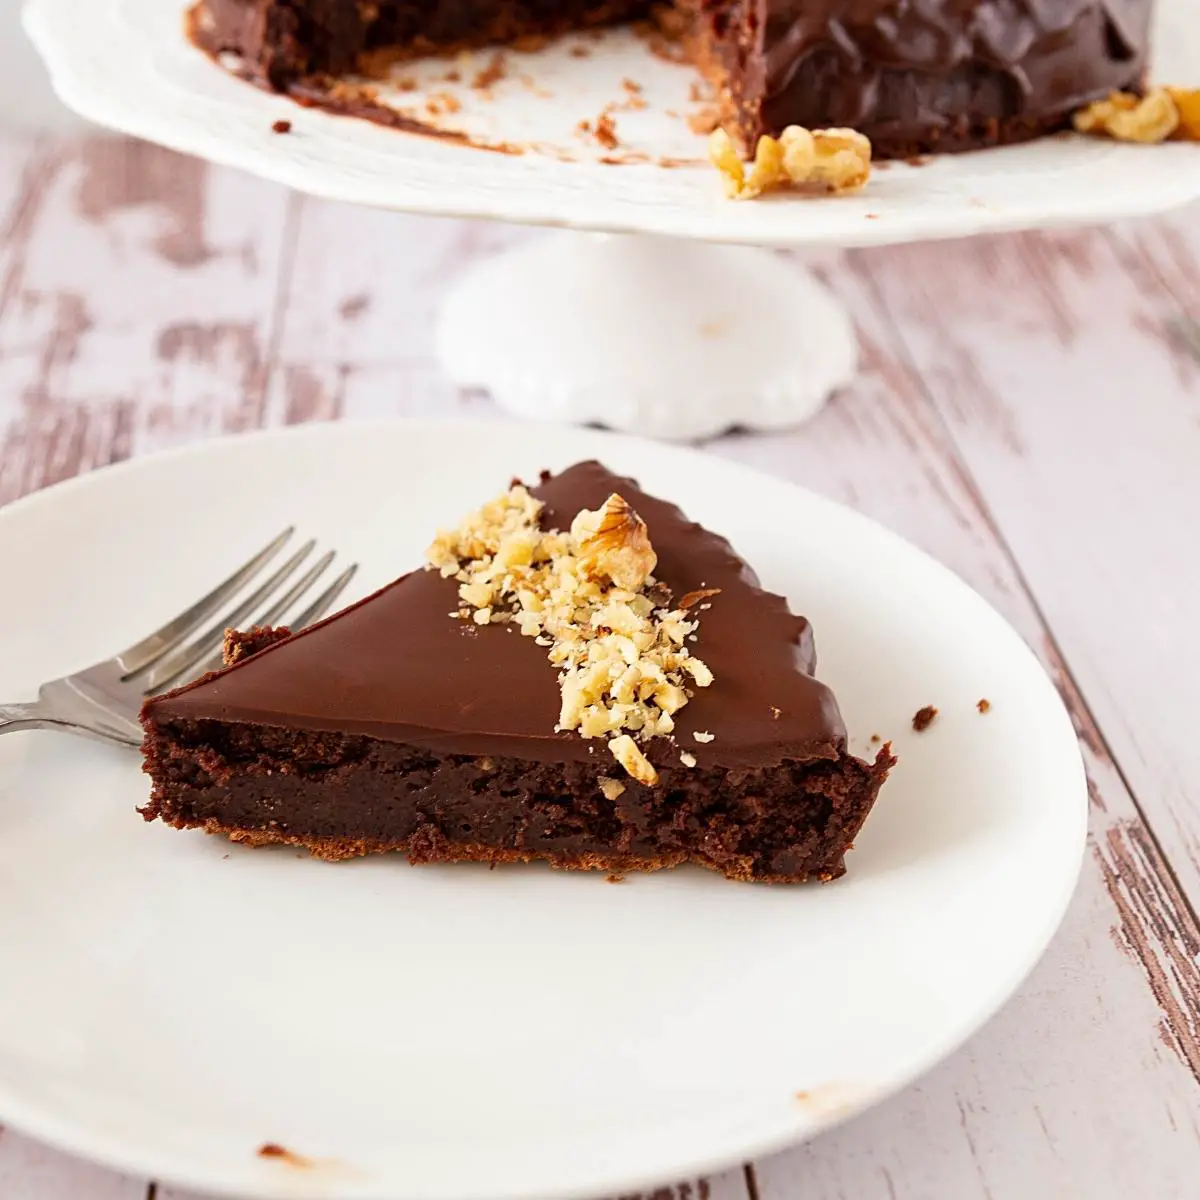 A slice of chocolate cake with walnuts.